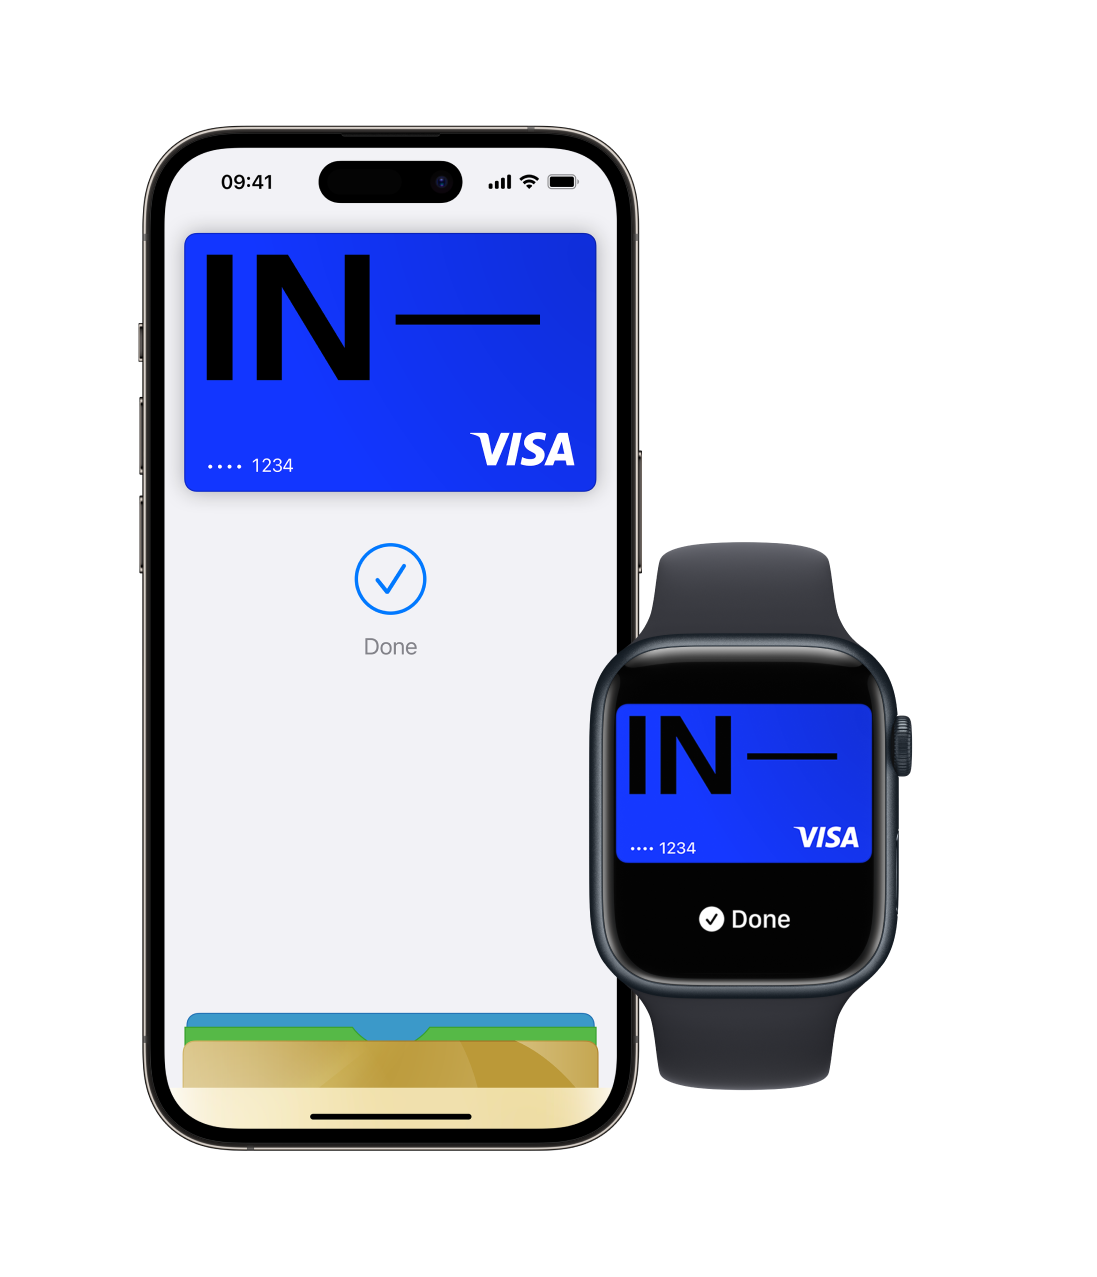 Image of an iPhone and Apple Watch displaying the Apple Wallet app, showcasing multiple cards with the Incharge card positioned on top. This visual depicts the Apple Pay feature with digital wallet functionality.